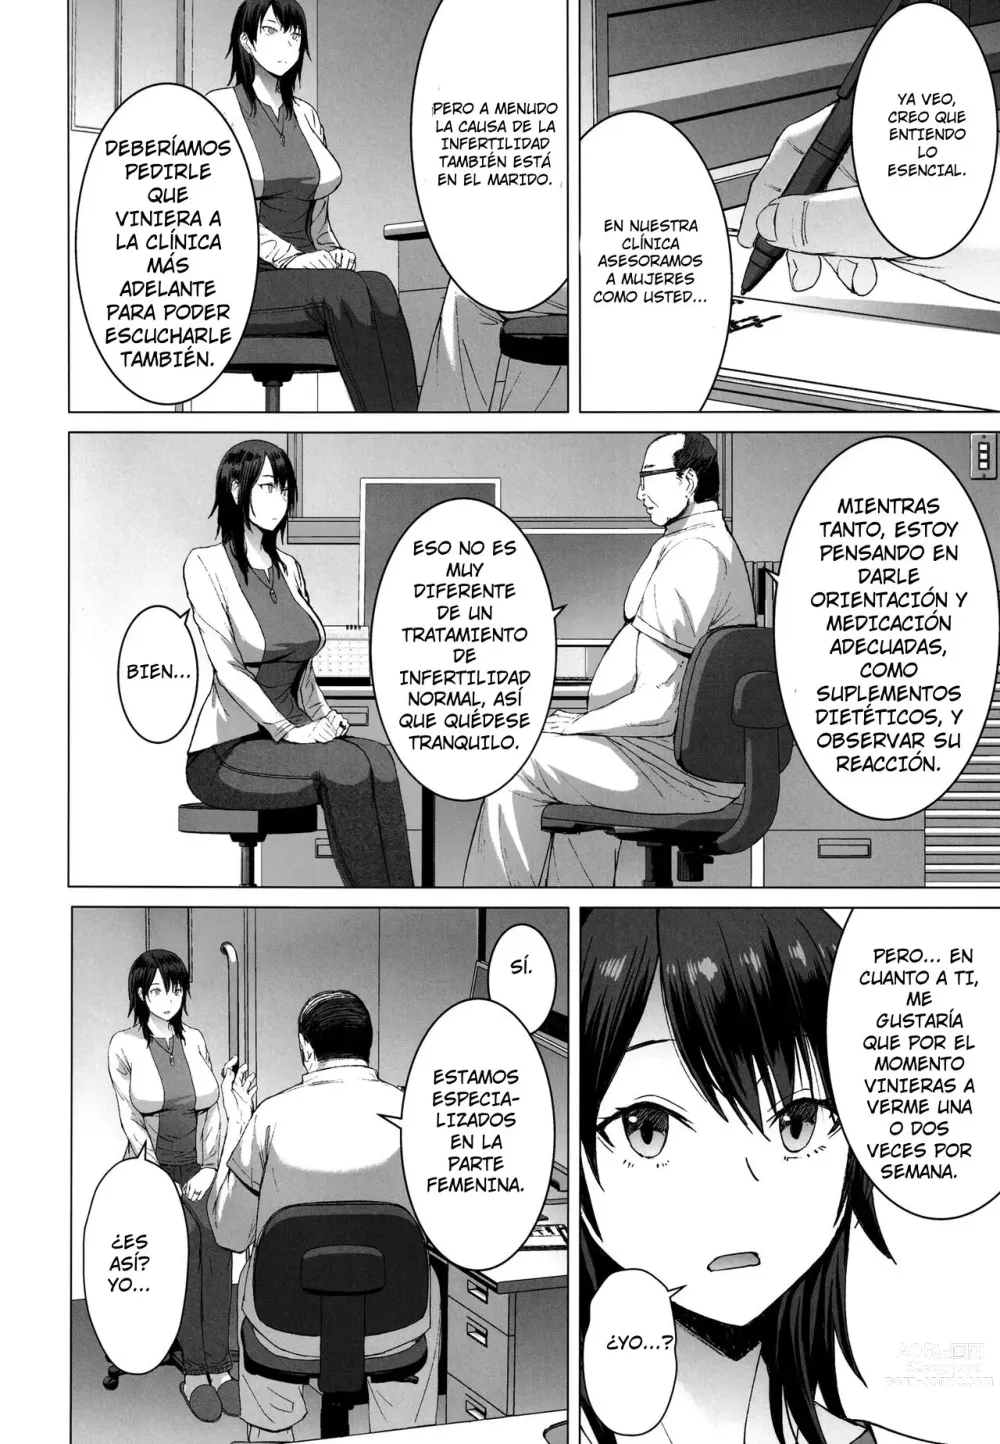 Page 3 of doujinshi Ninkatsu Hitozuma Collection - the collection of married women undergoing infertility treatment.